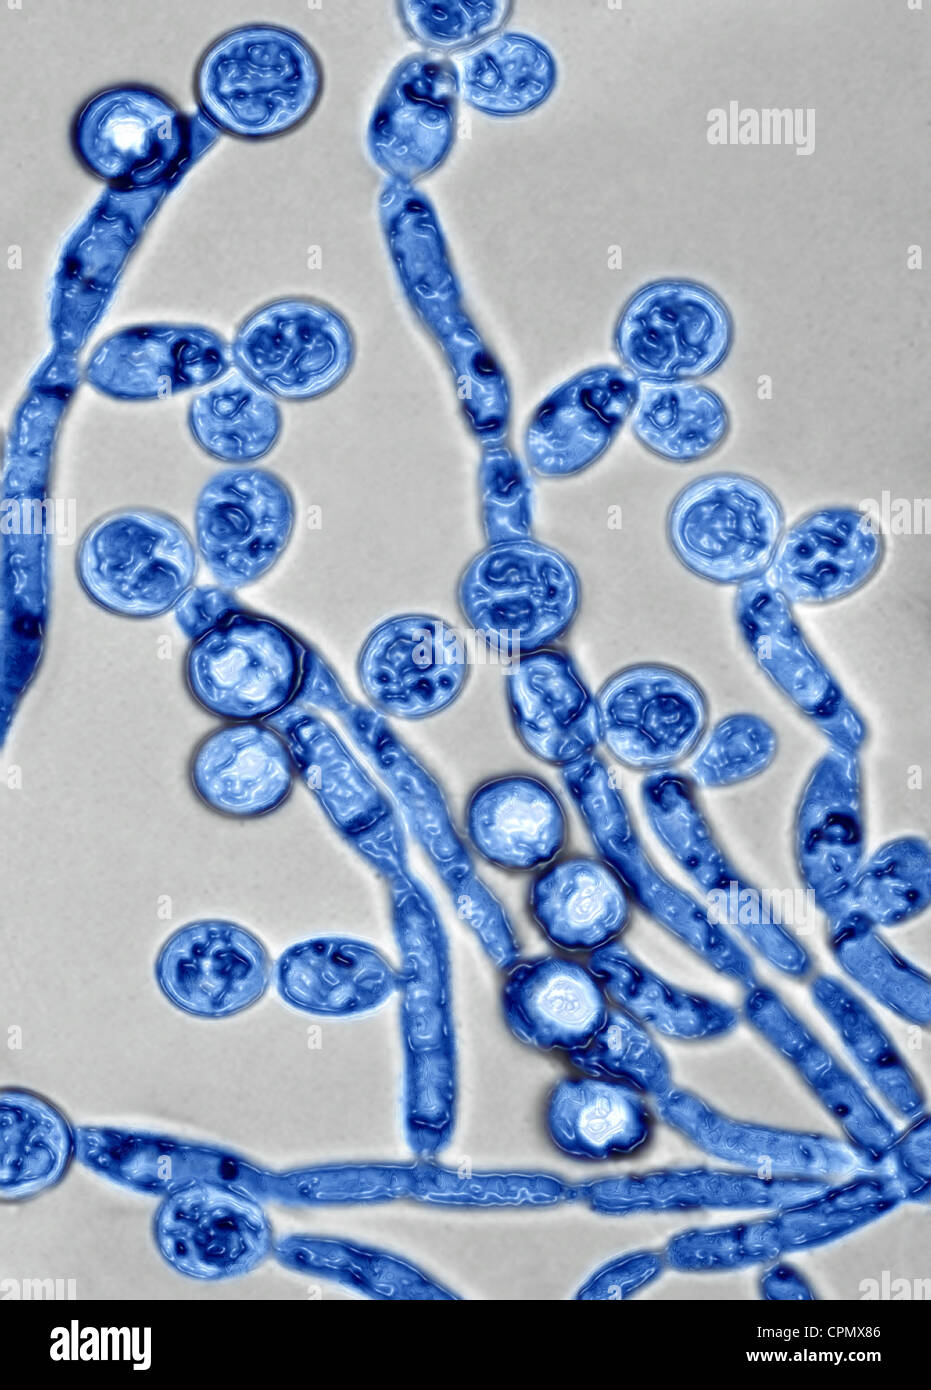 CANDIDA ALBICANS Stock Photo